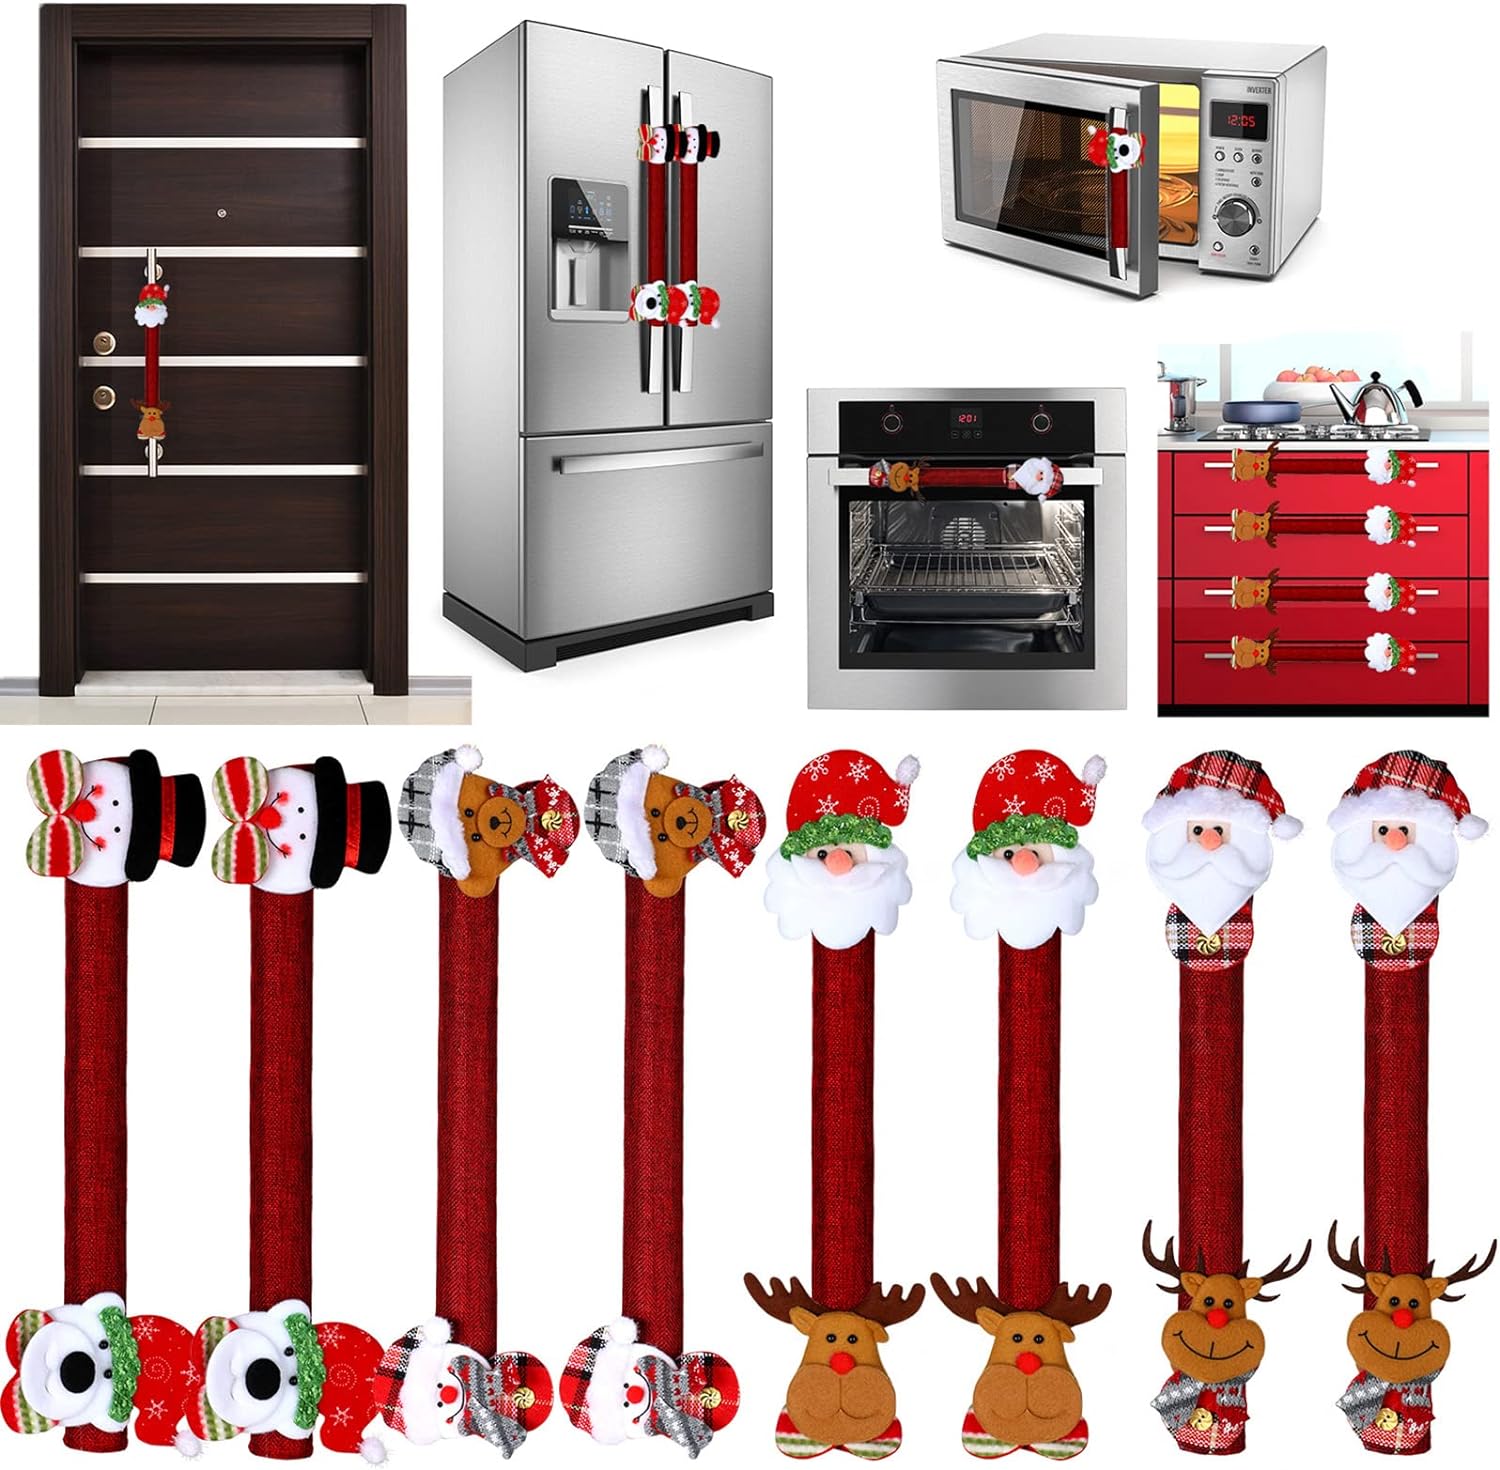 BOAO Christmas Refrigerator Door Handle Cover Santa Snowman Kitchen Appliance Handle Covers Decorations for Fridge Microwave Oven Di